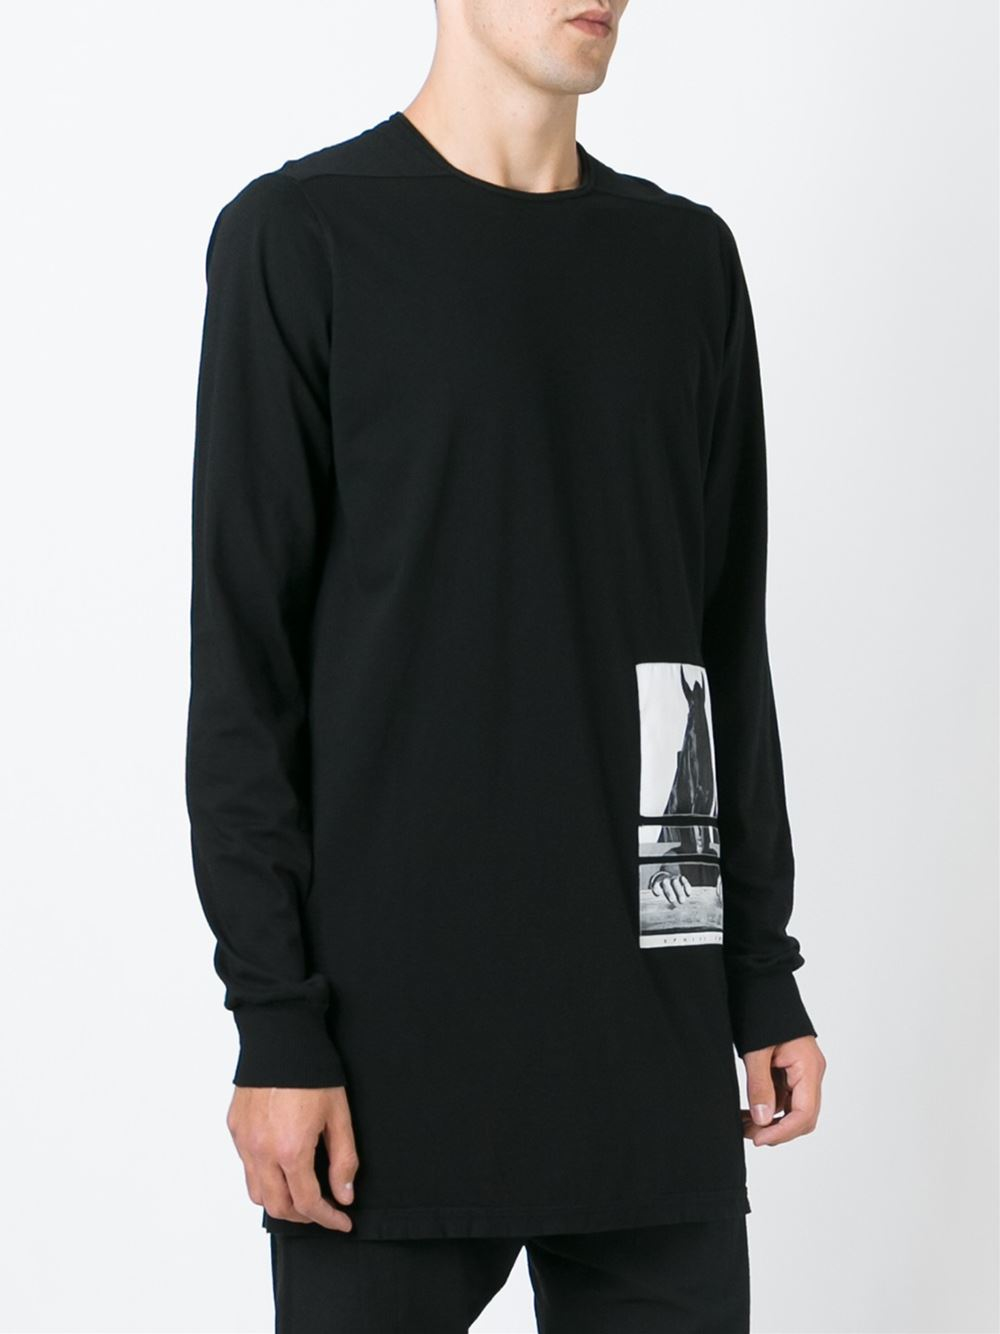 Rick Owens Drkshdw Cotton Patch Long Sleeve T-shirt in Black for Men - Lyst